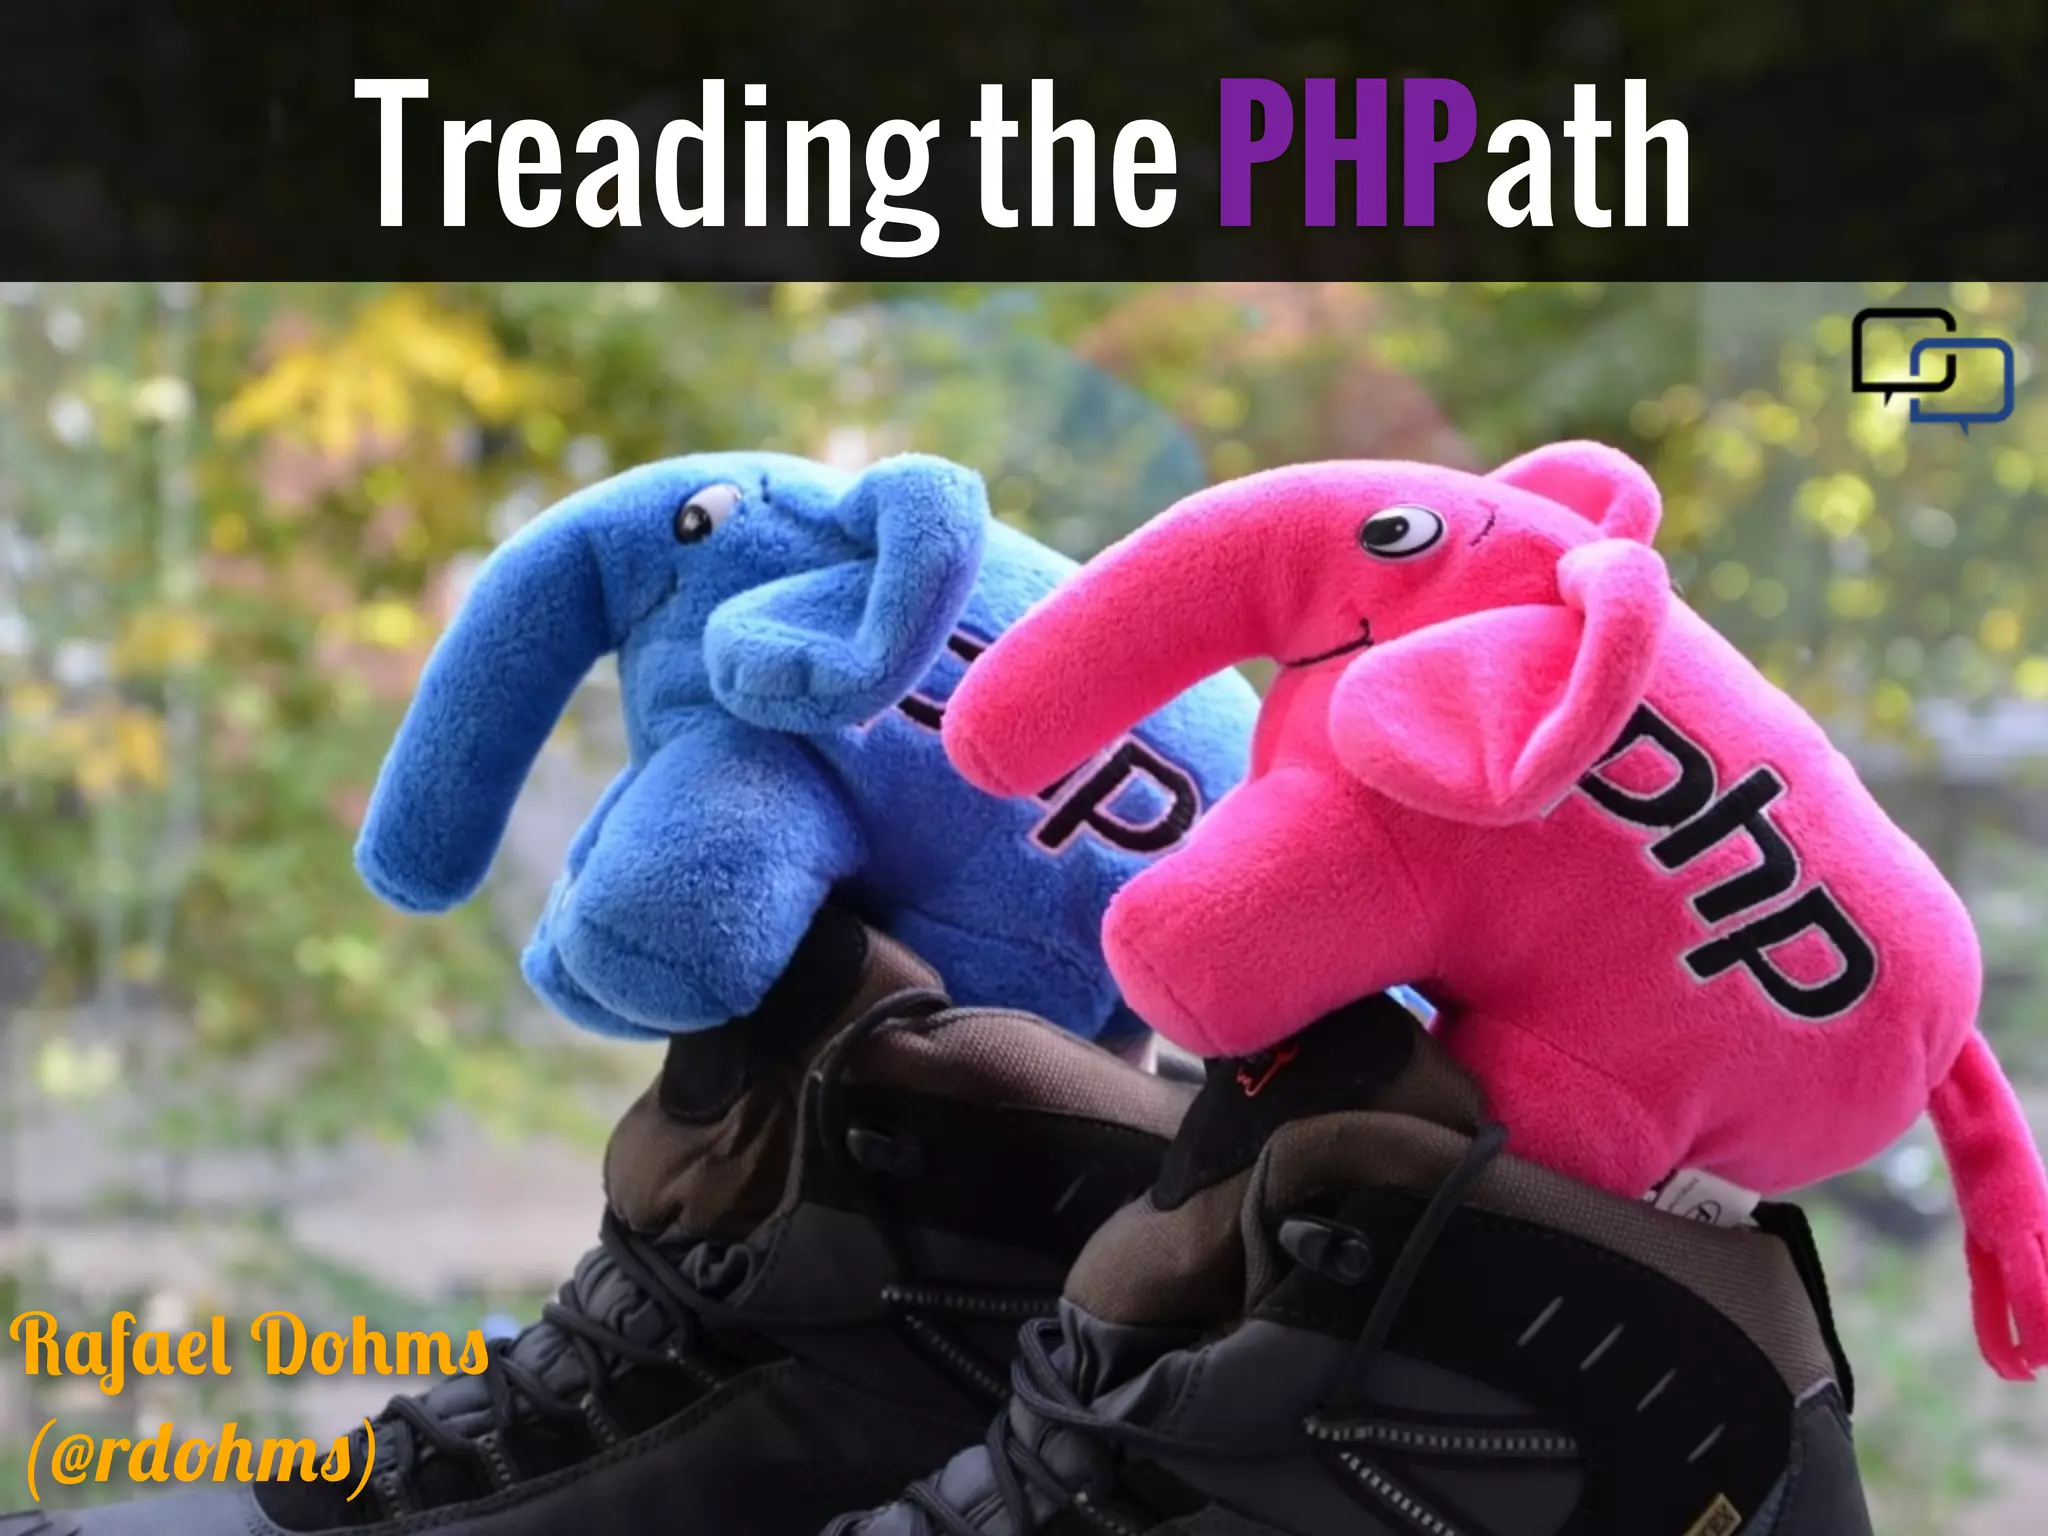 Treading the PHPath